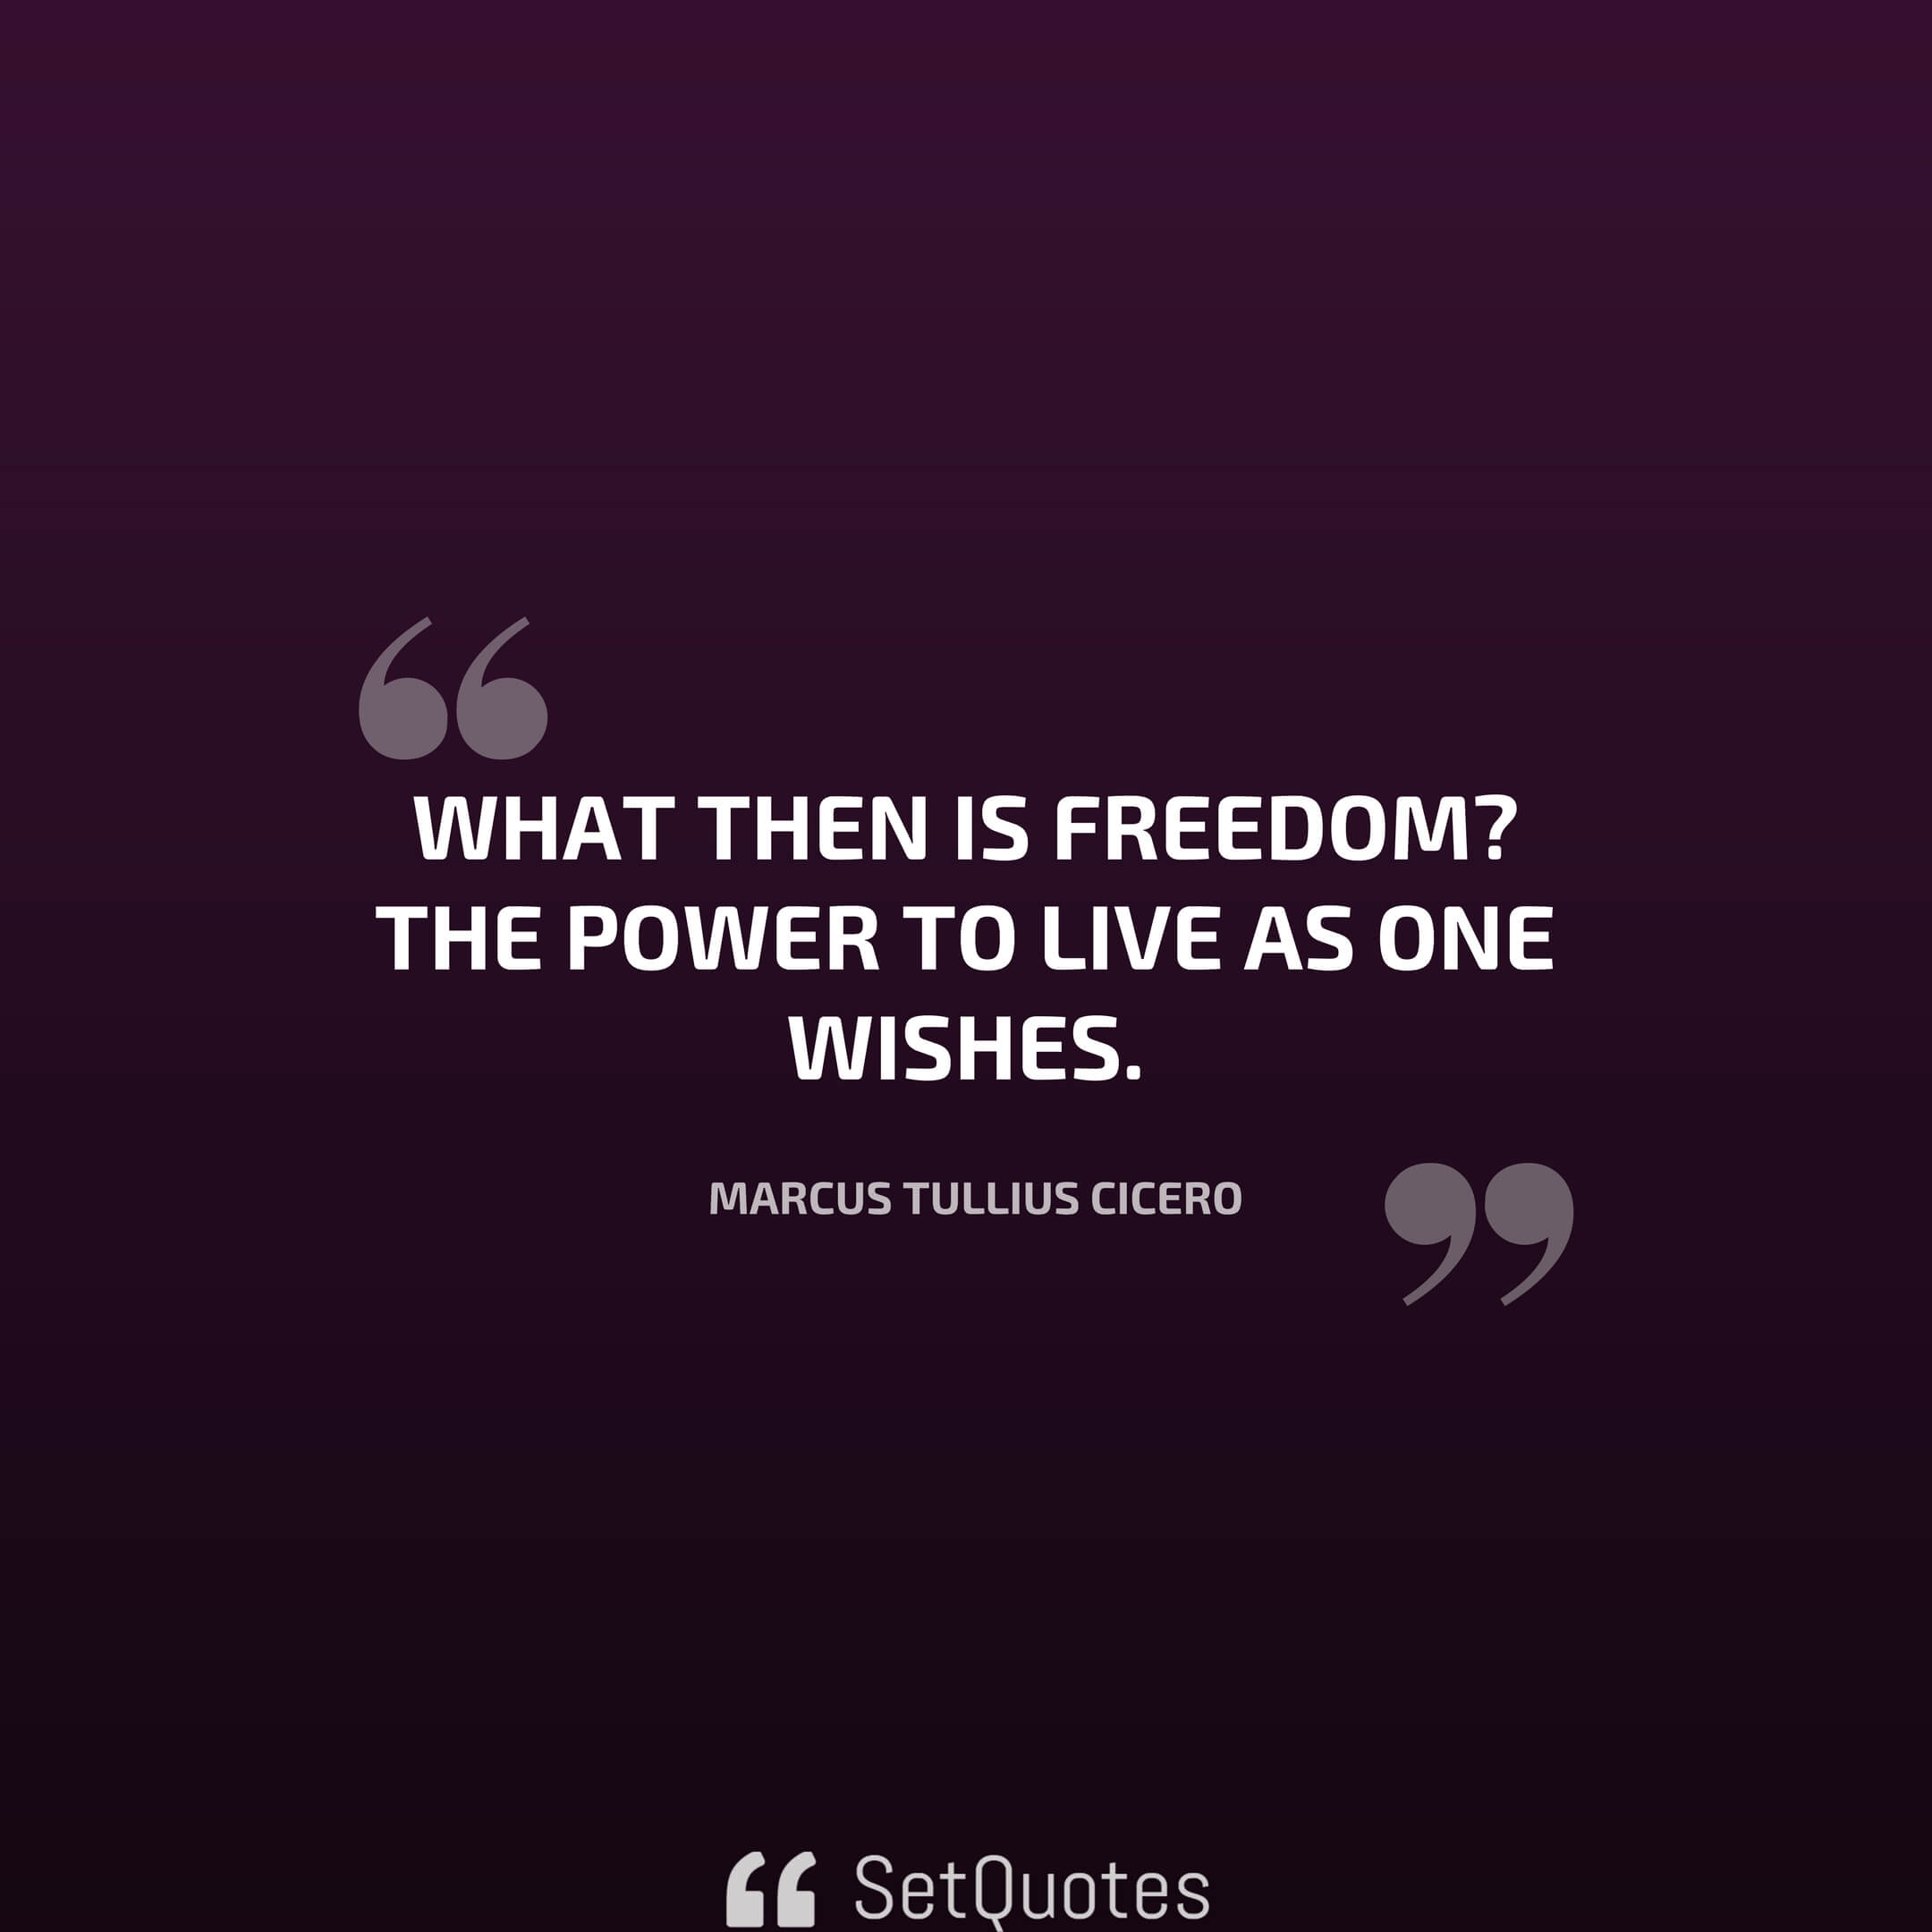 What then is freedom? The power to live as one wishes. – Marcus Tullius Cicero